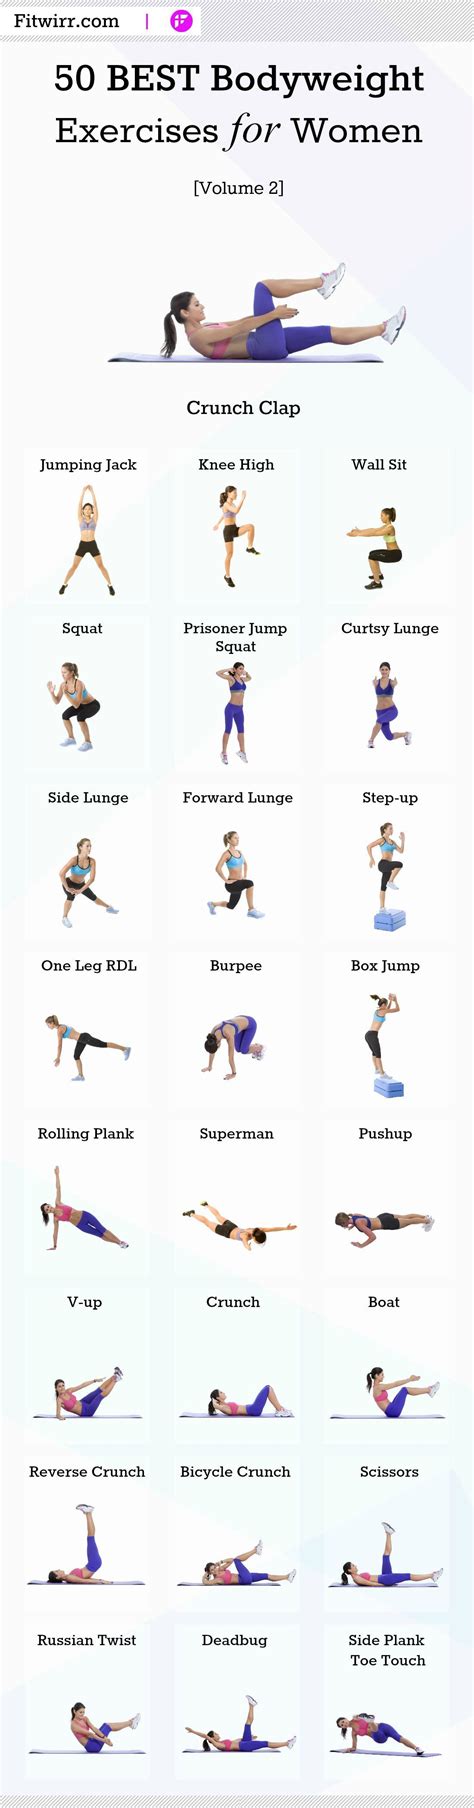 50 Best Bodyweight Exercises You Can Do Anywhere To Get Fit Träning